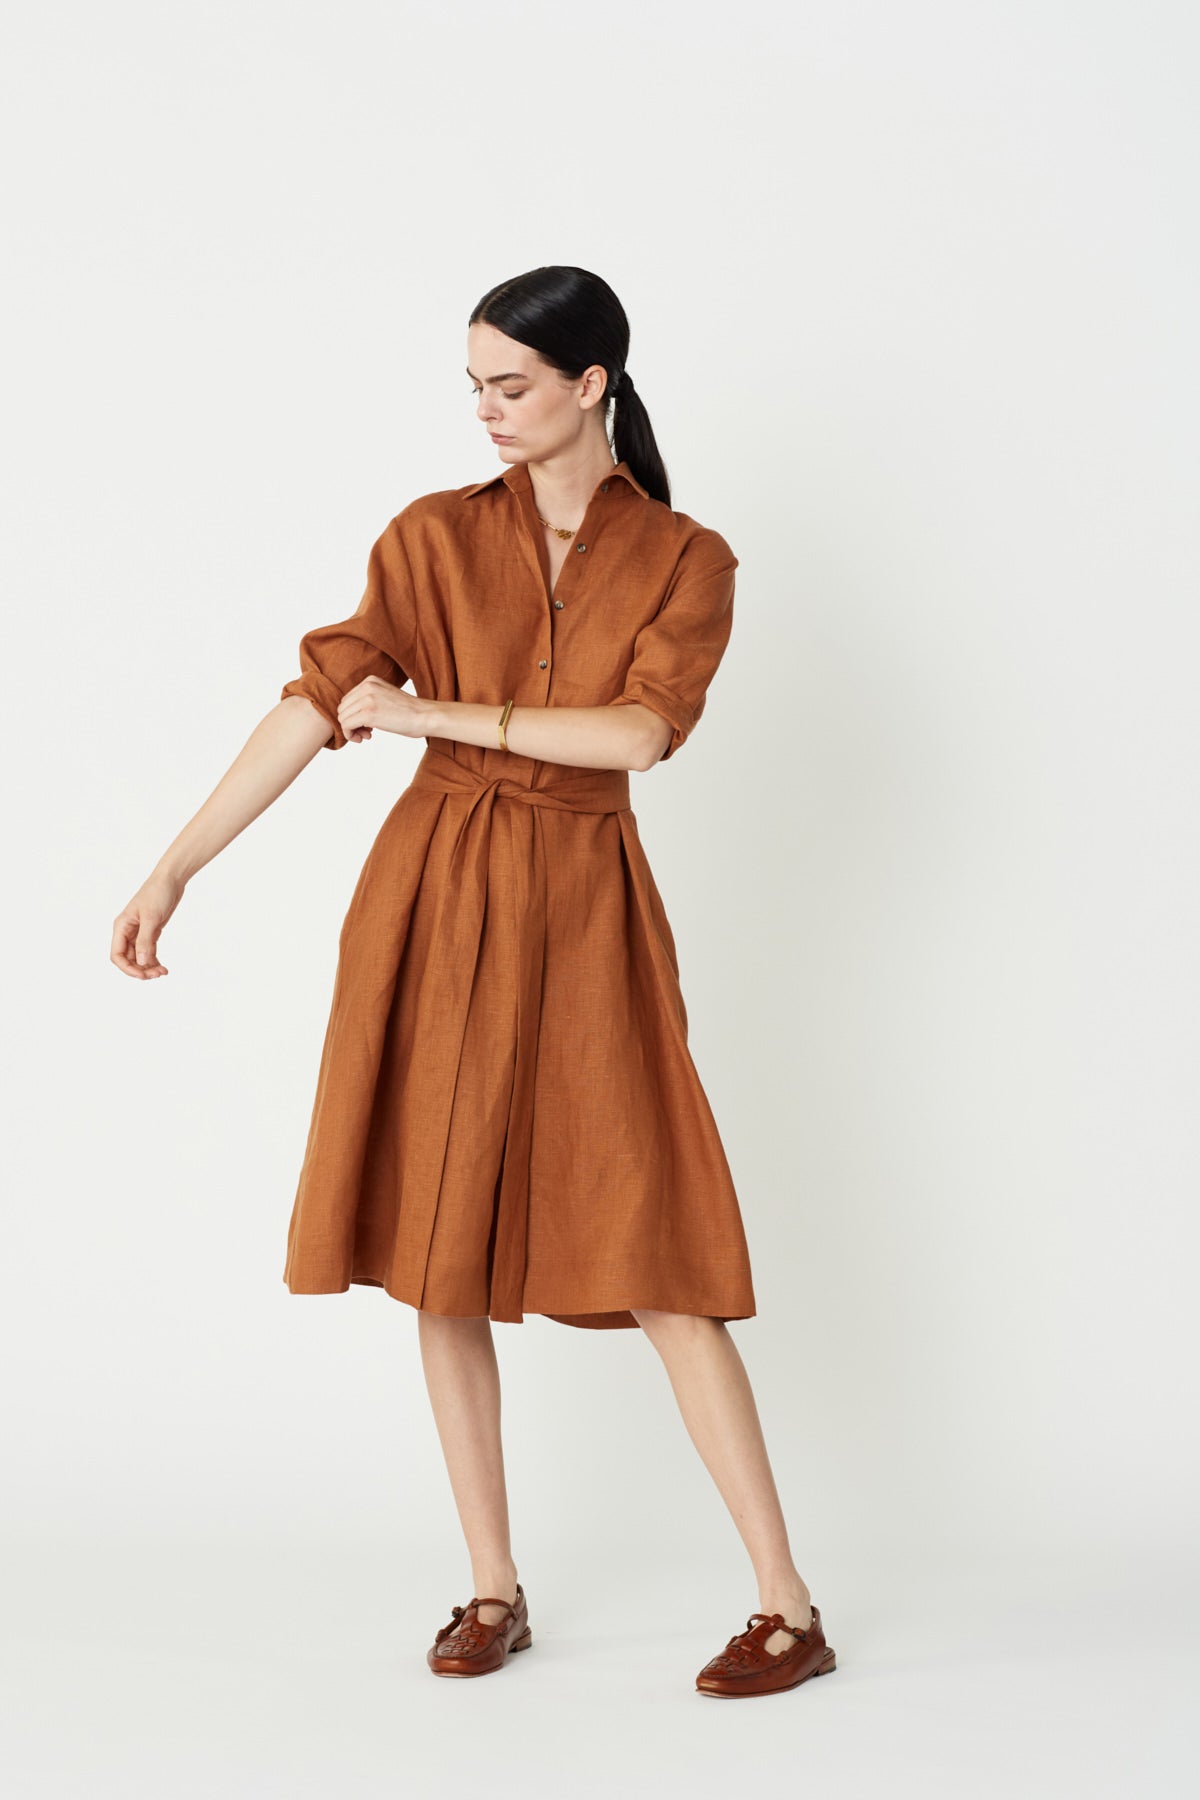 Allana Linen Belted Shirtdress in Cognac Linen. Made in Atlanta, ethically and sustainably, by slow fashion designer Megan Huntz. 